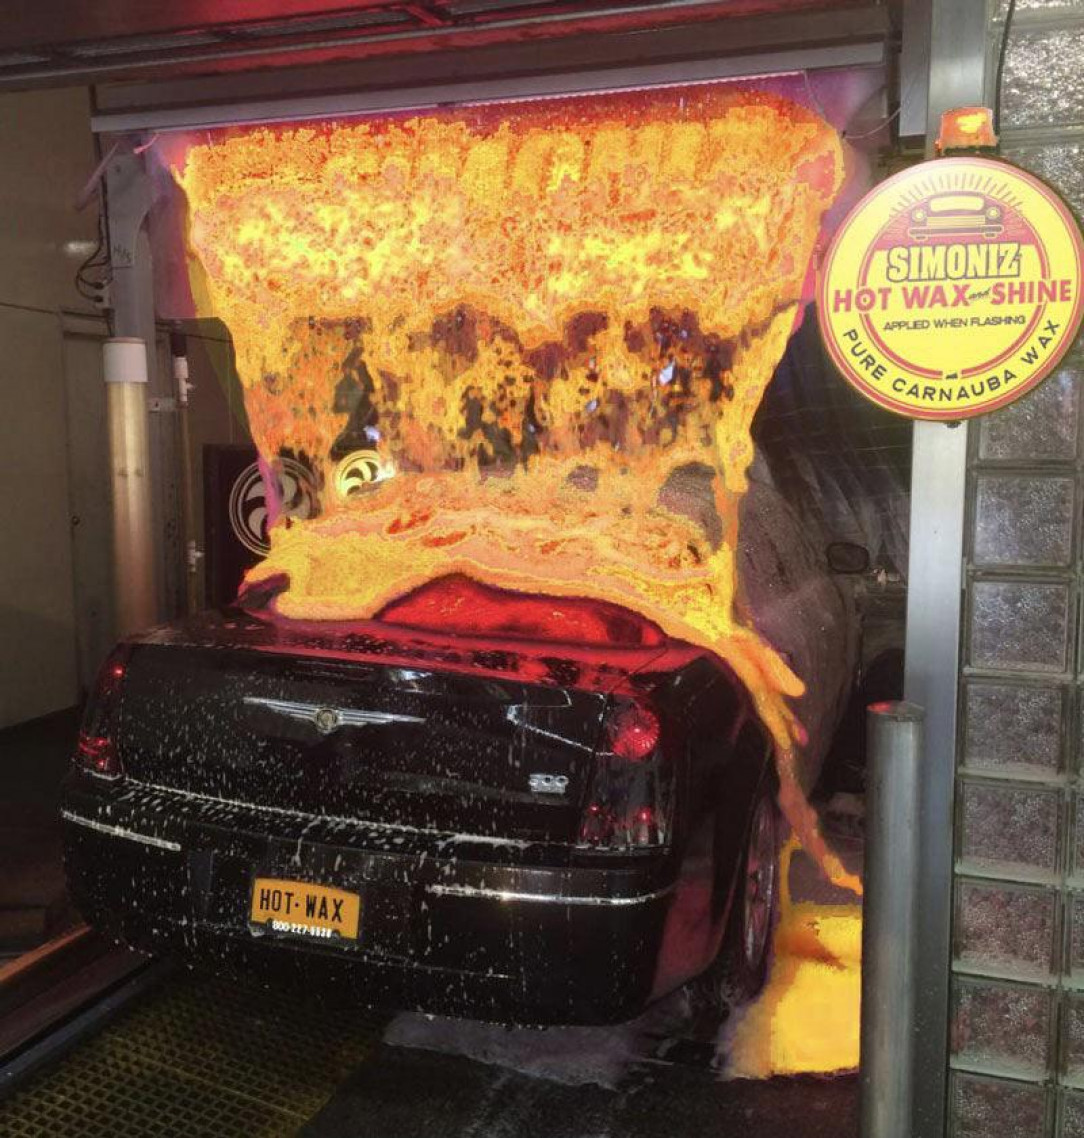 This Car Wash’s soap solution looks the molten lava